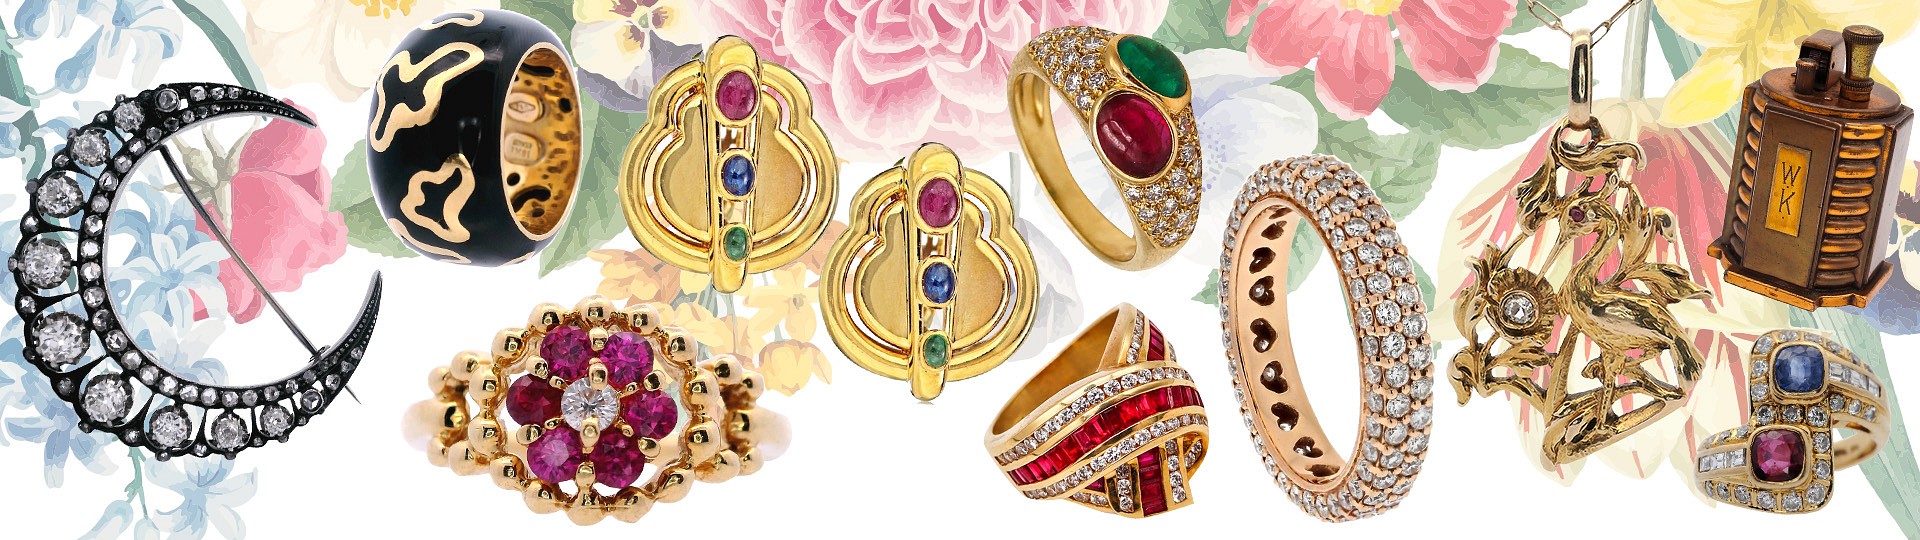 	The Spring Favorite Jewelry Collection by WinBids Auctions